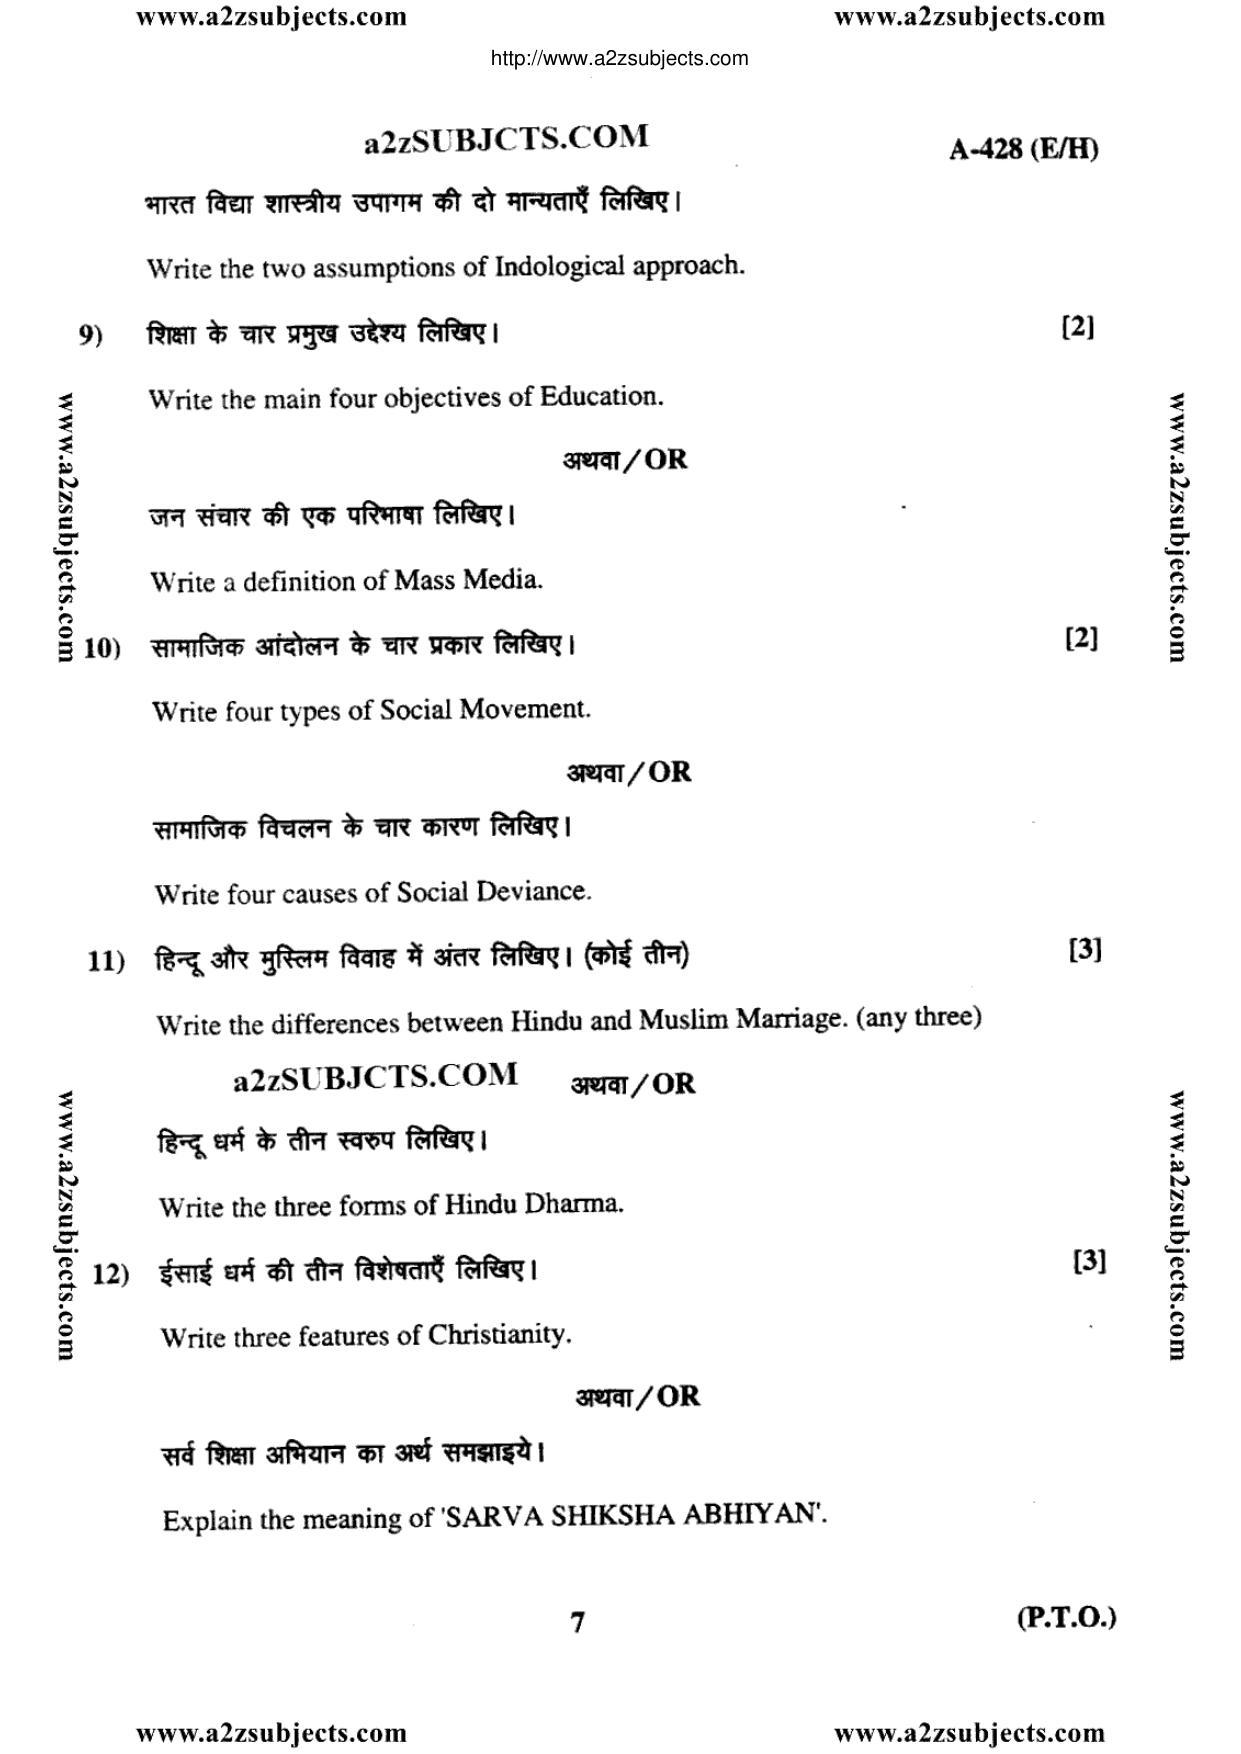 MP Board Class 12 Sociology 2017 Question Paper - Page 7